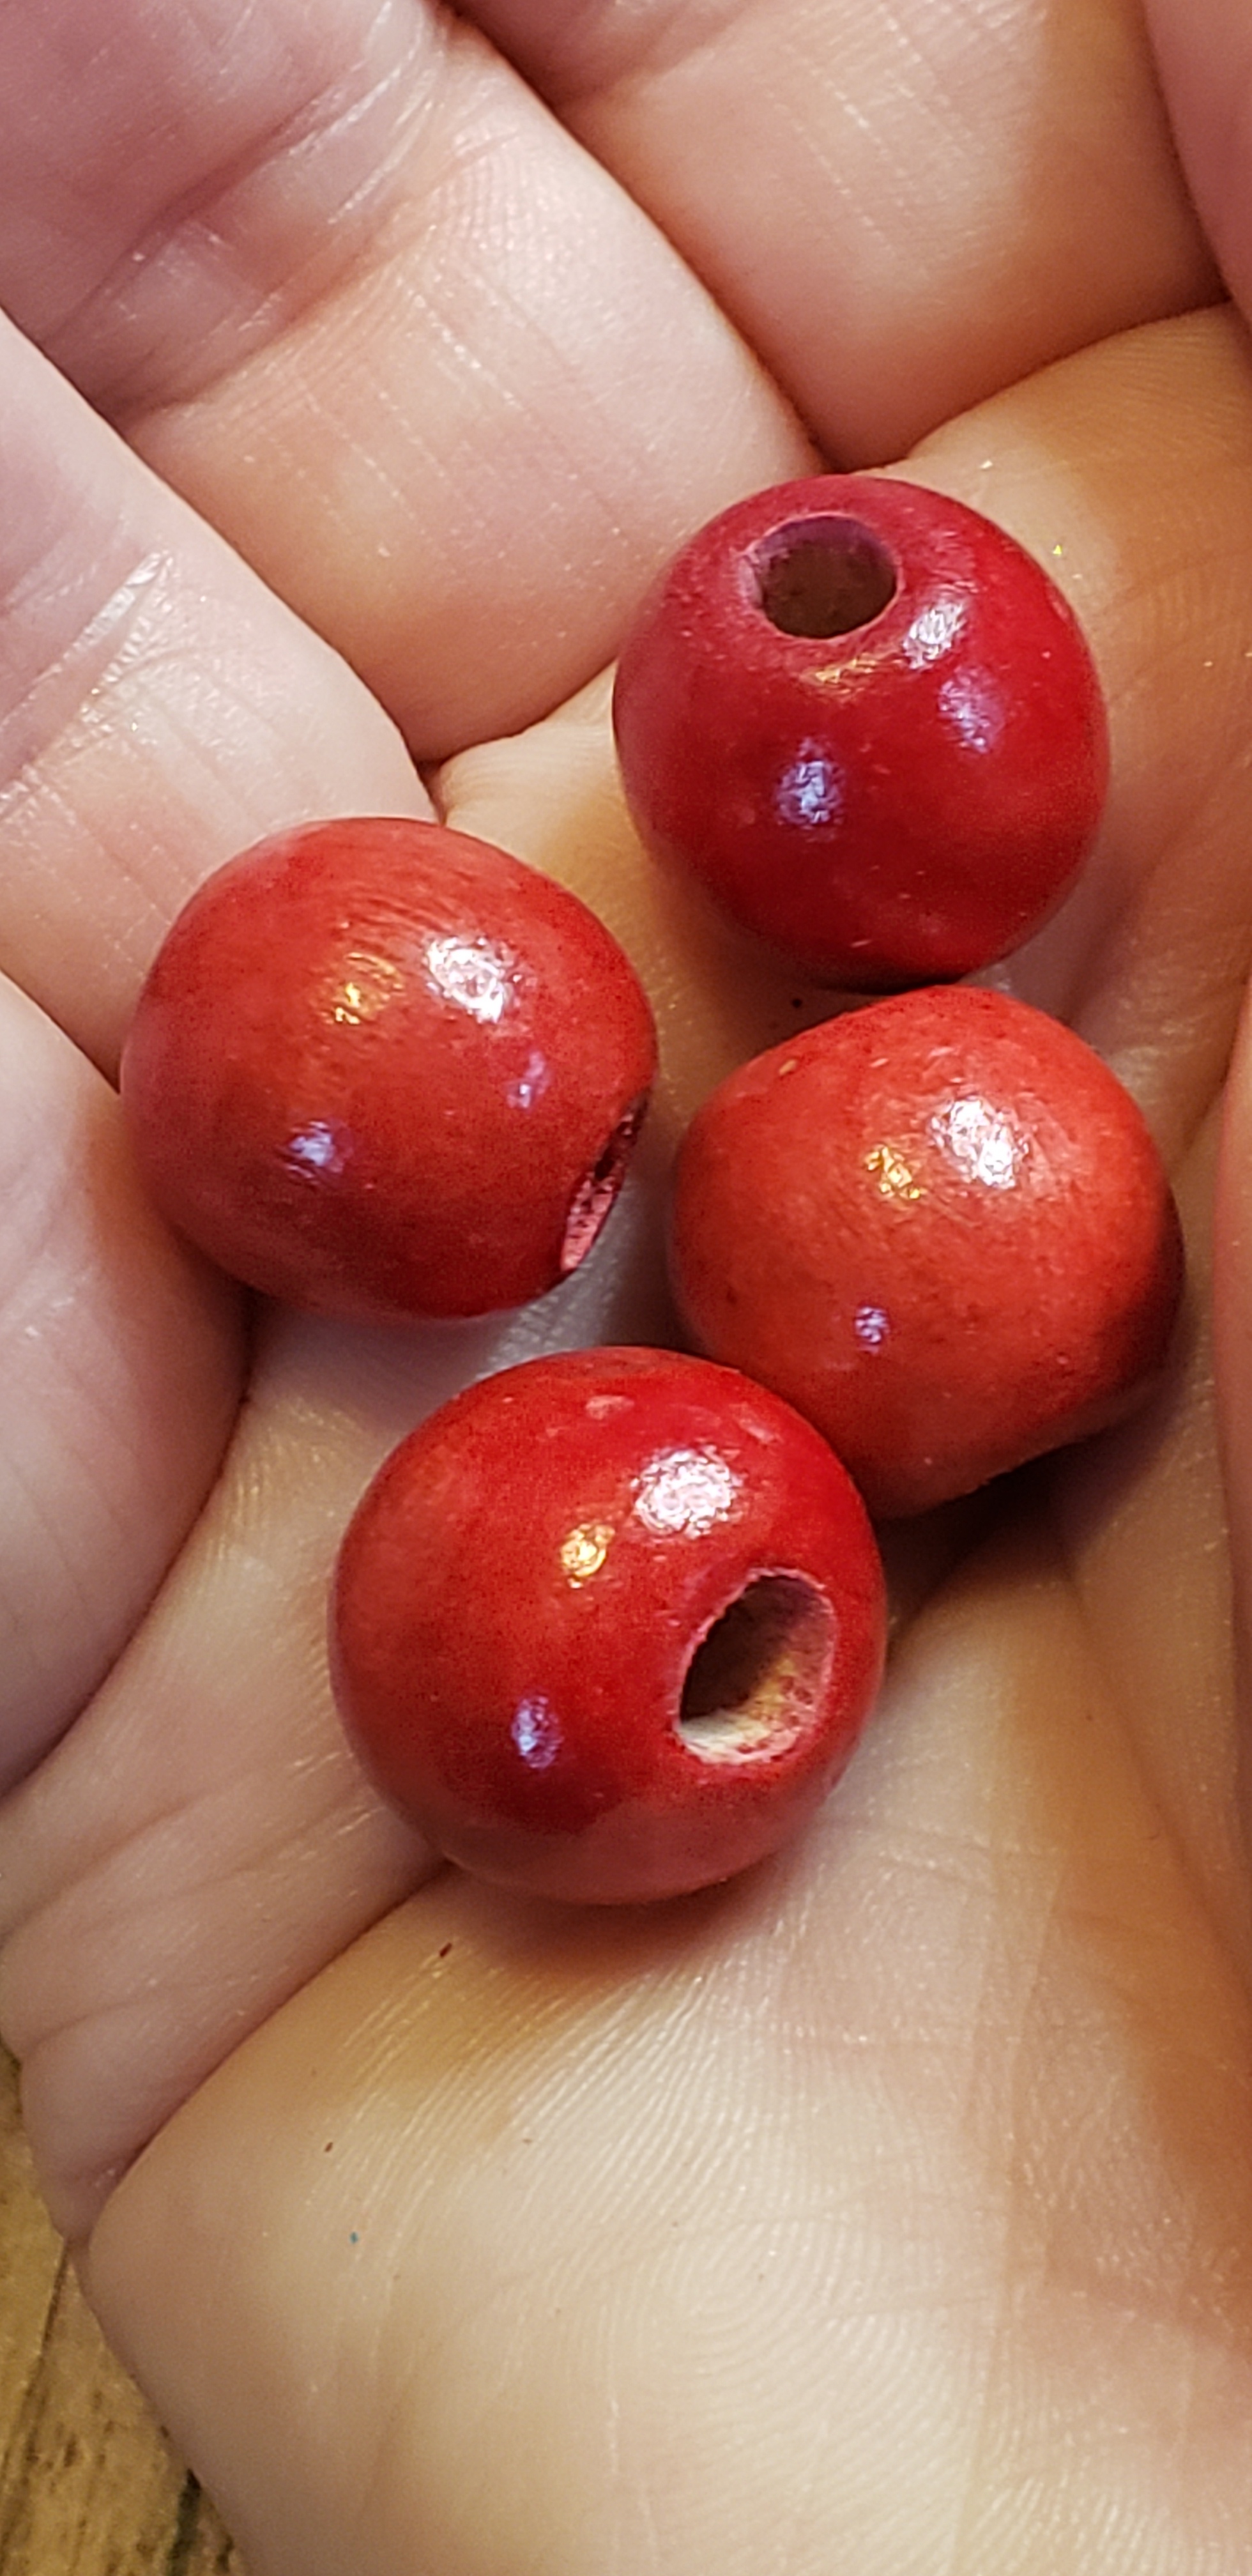 Red Wooden Beads 14mm